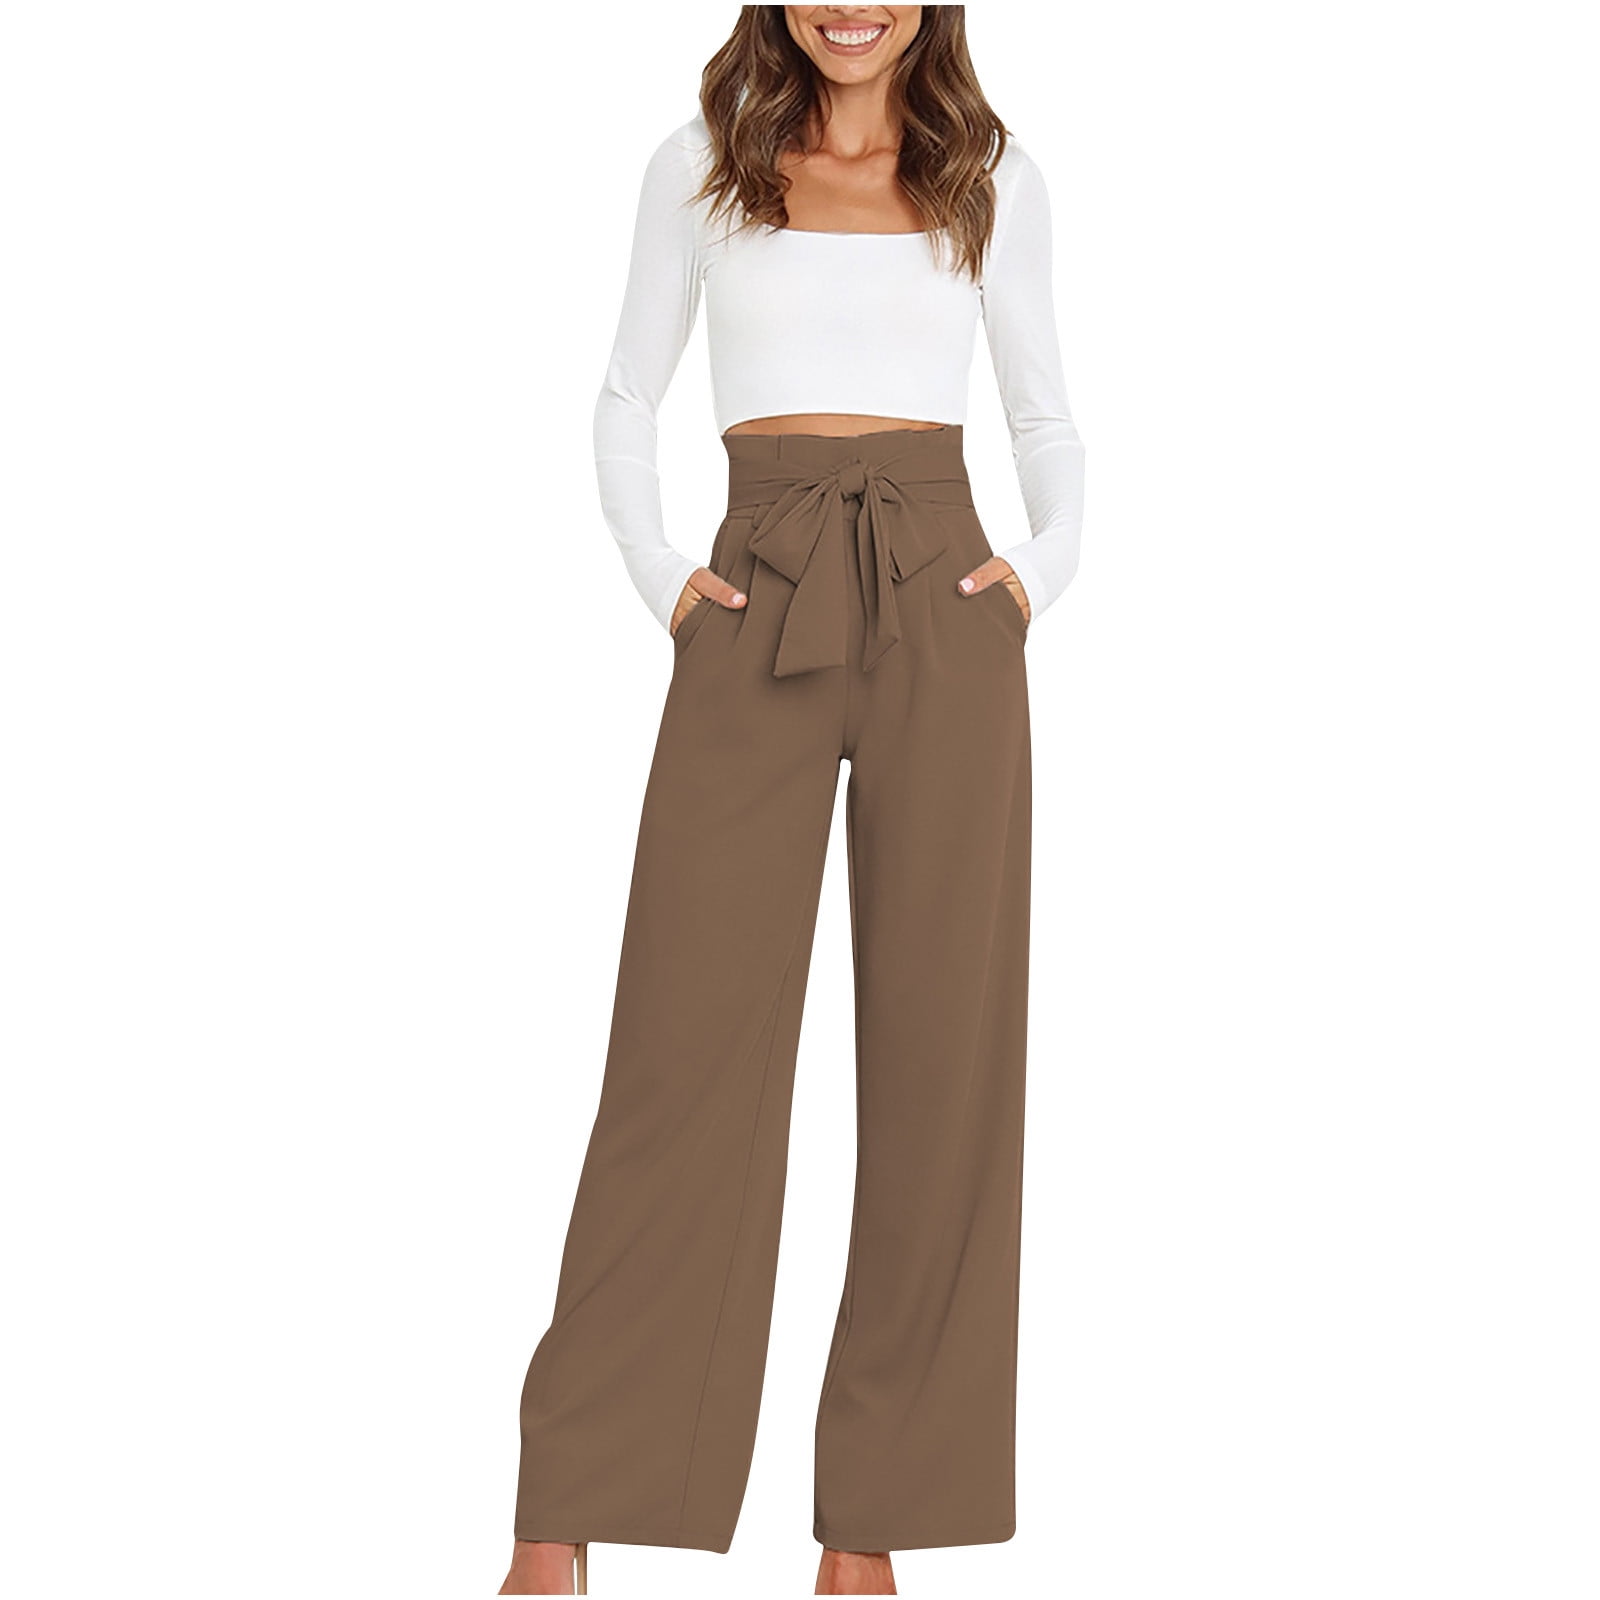 Women Trousers Polyester Fiber Pure Color High Waist Two Pockets Female  Long Pants For Daily Travel Trousers Women Y2K For Uk Khaki Pants Size 16 Wo